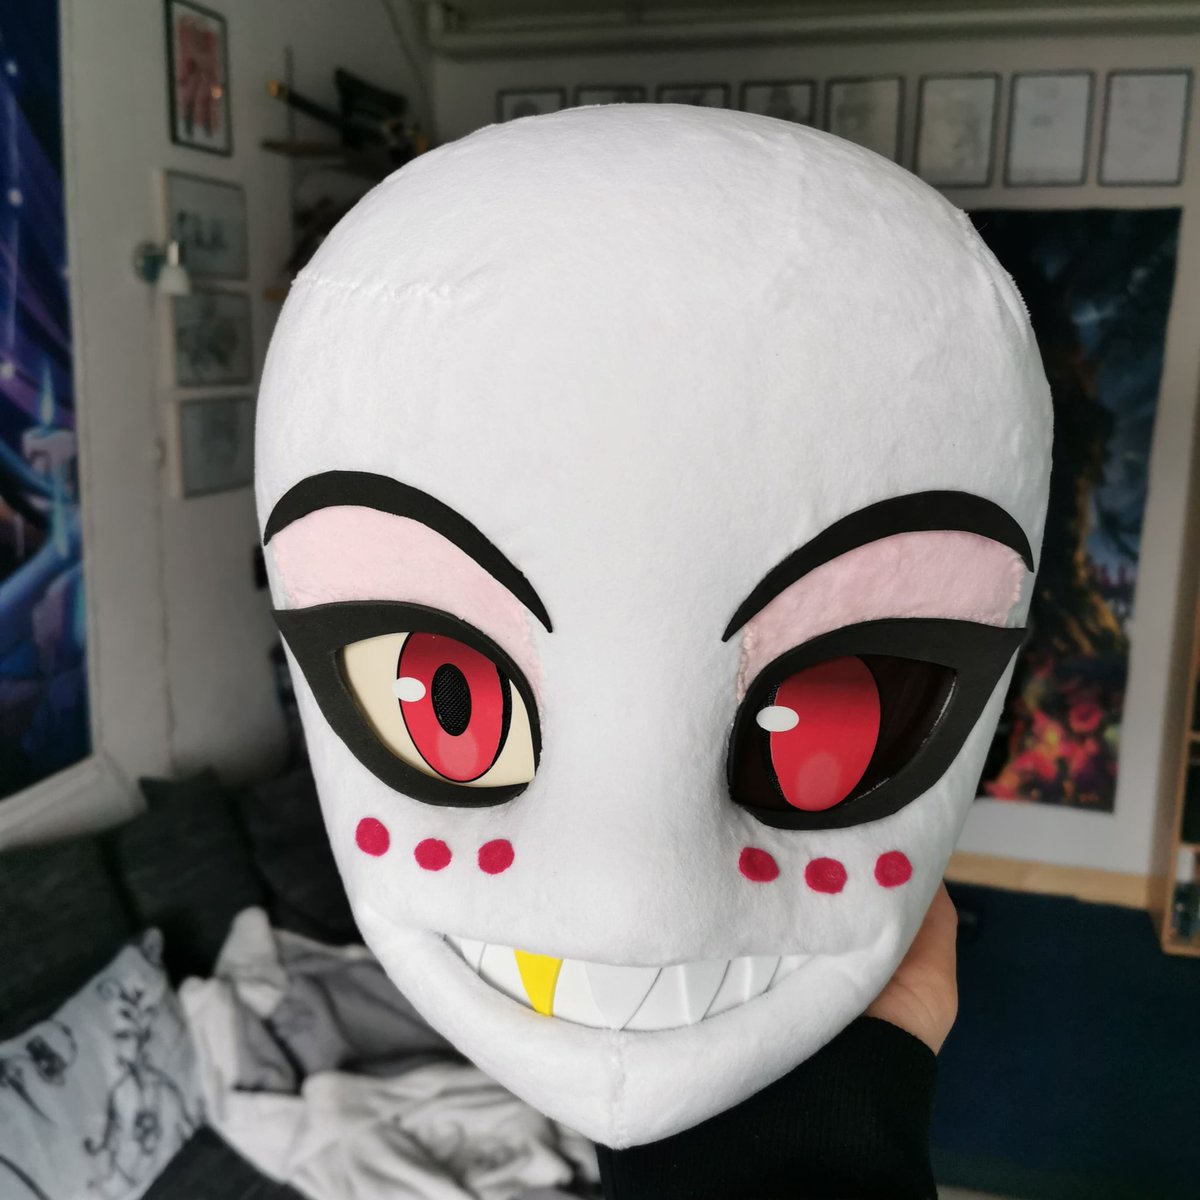 Angel Dust 2.0 coming together. This time managed to get this done within a week. All that's left is padding and the hair. #kigurumi